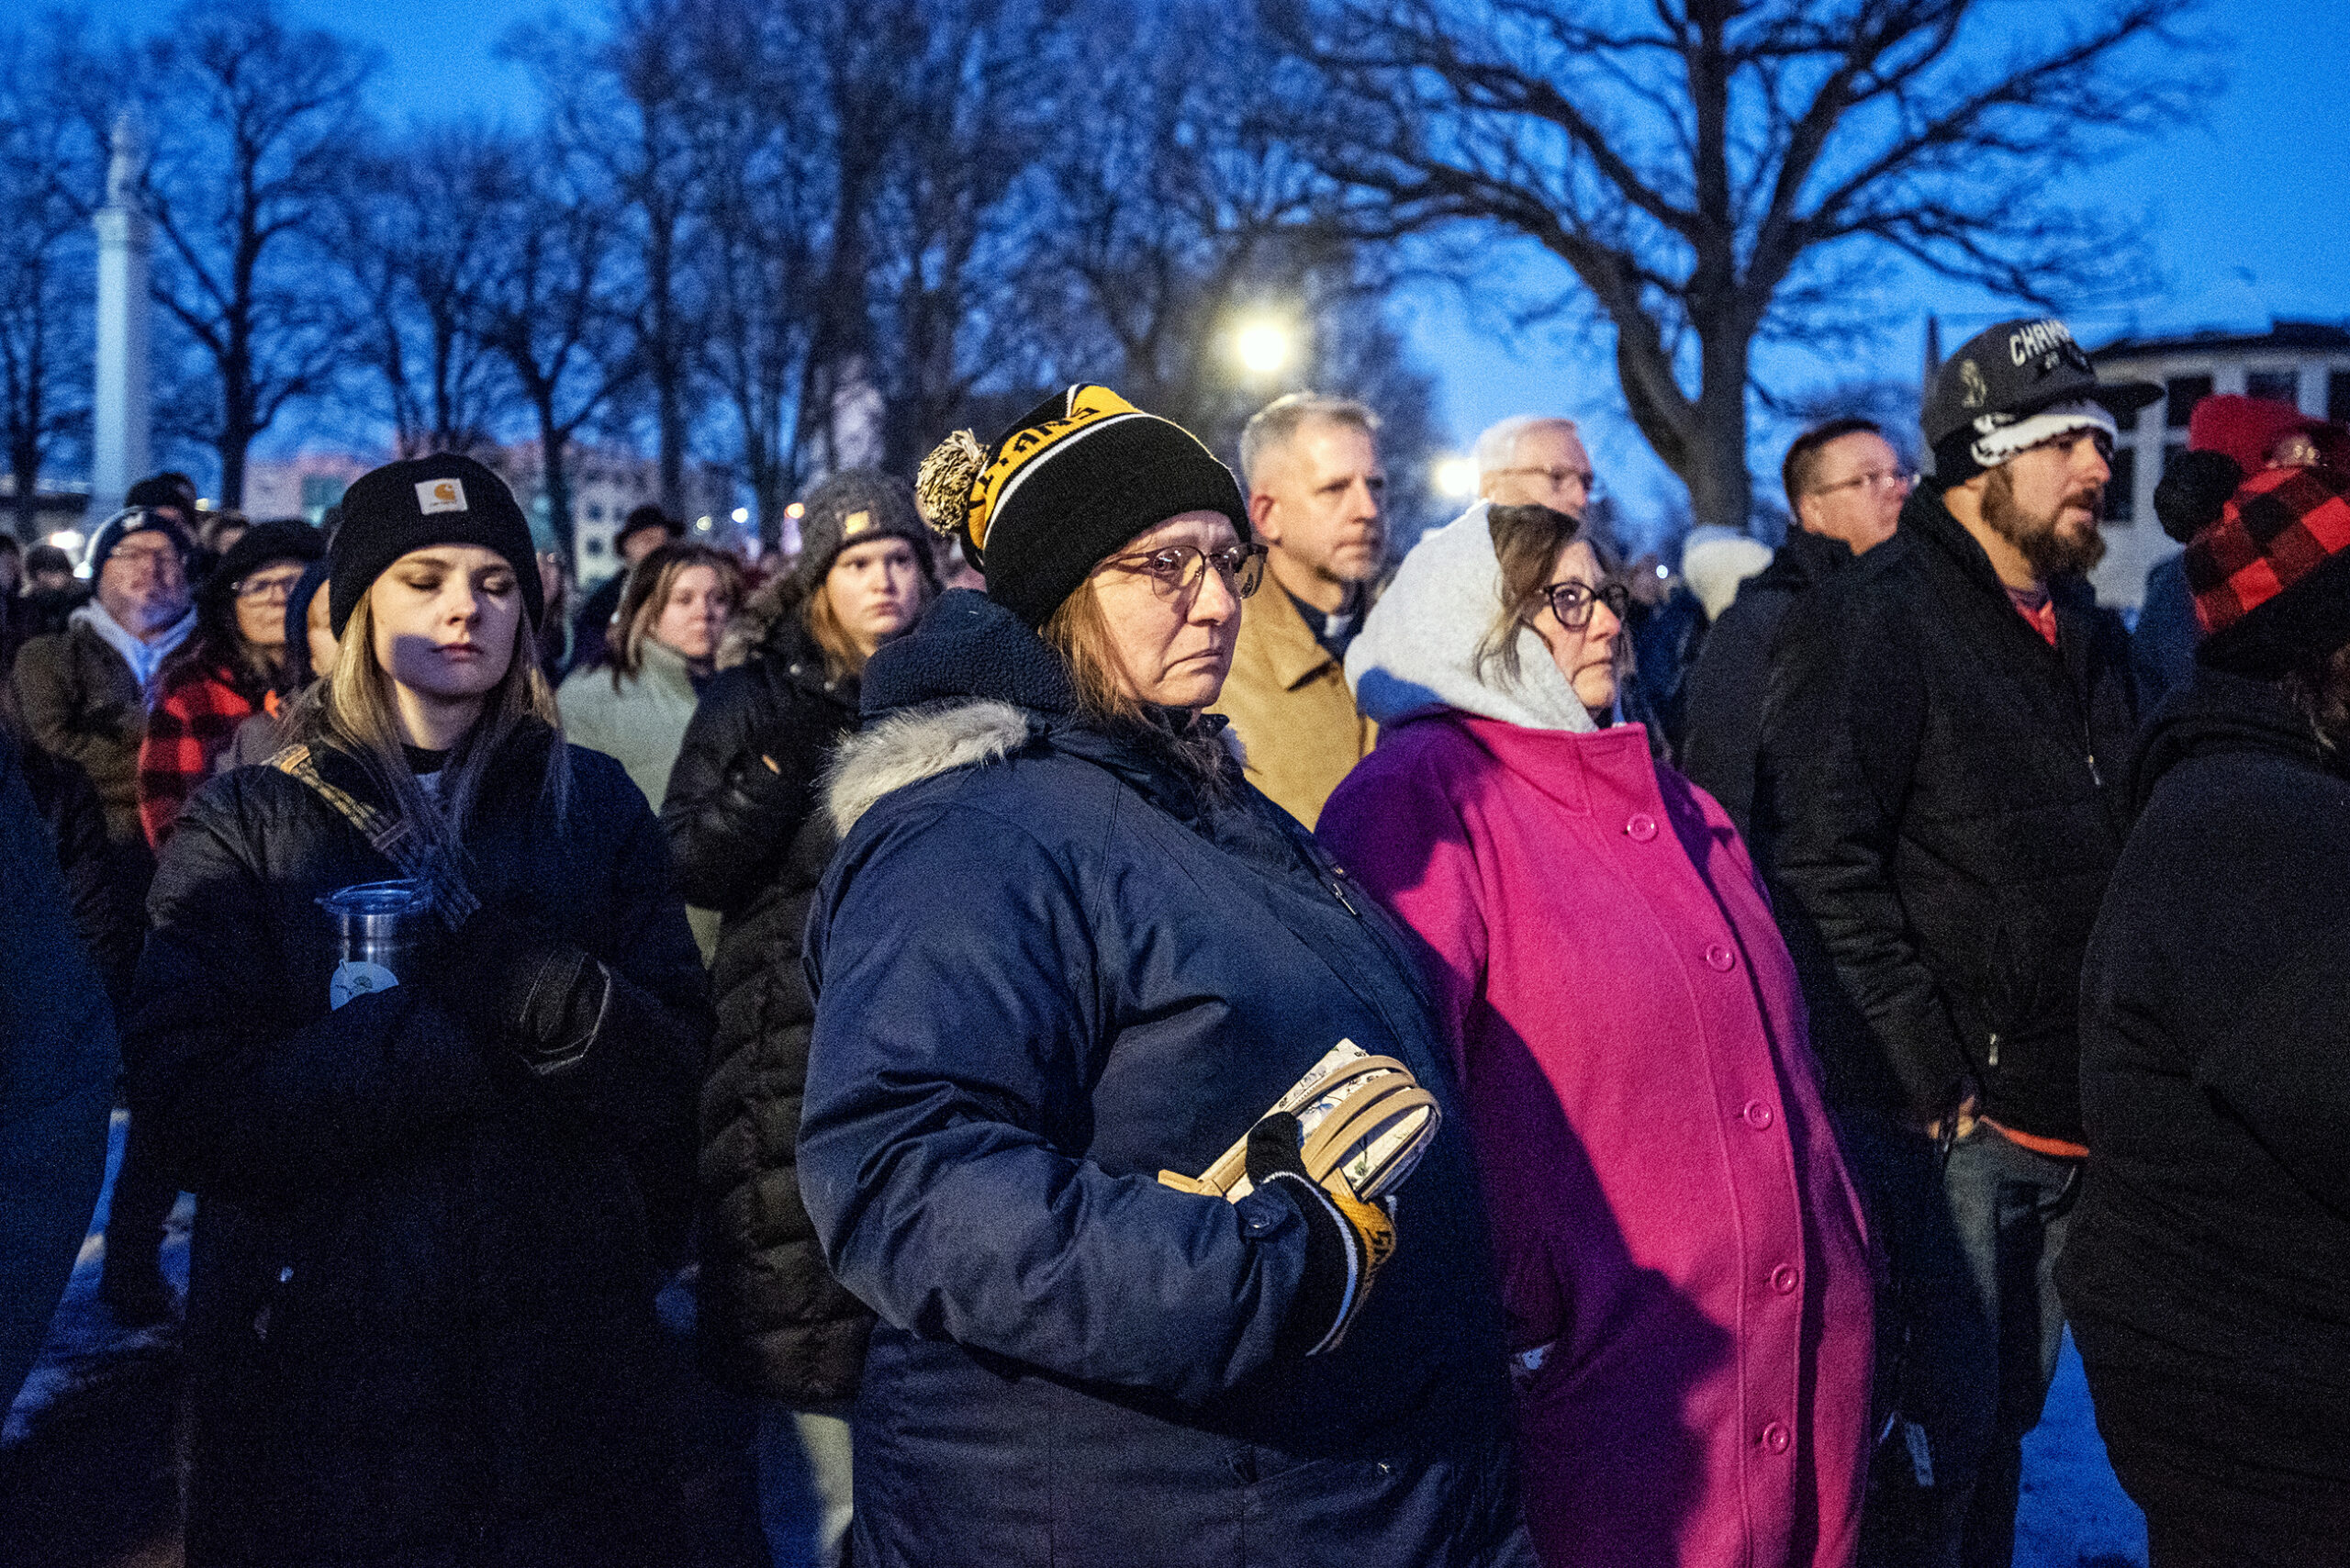 People in winter coats stand together at dusk.